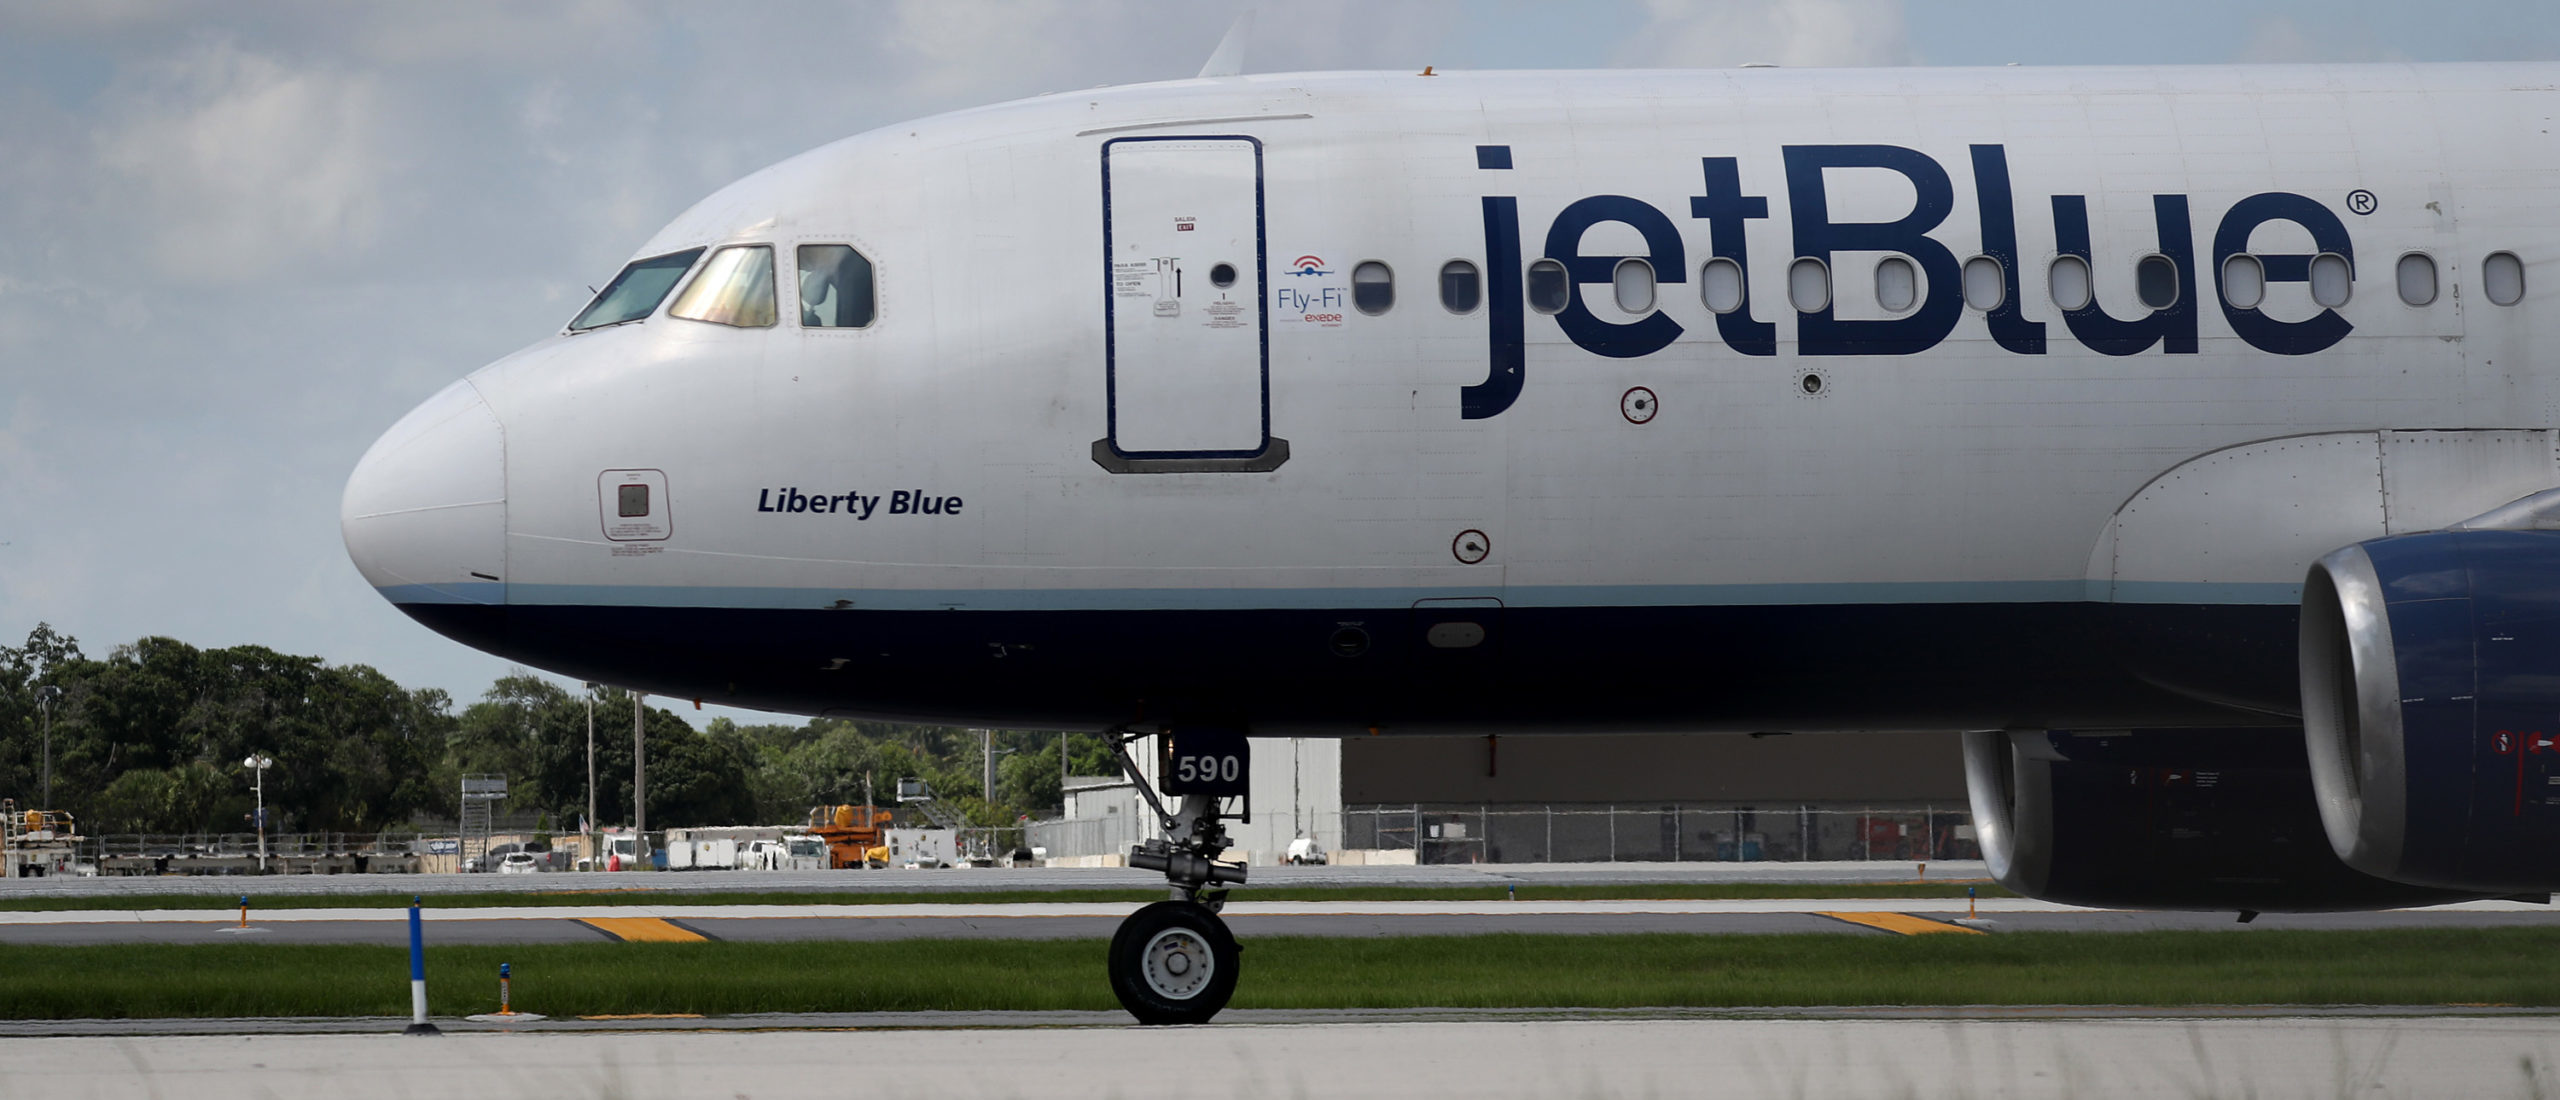 FORT LAUDERDALE, FLORIDA - JULY 16: A JetBlue plane prepares to take off from the Fort Lauderdale-Hollywood International Airport on July 16, 2020 in Fort Lauderdale, Florida.(Photo by Joe Raedle/Getty Images)